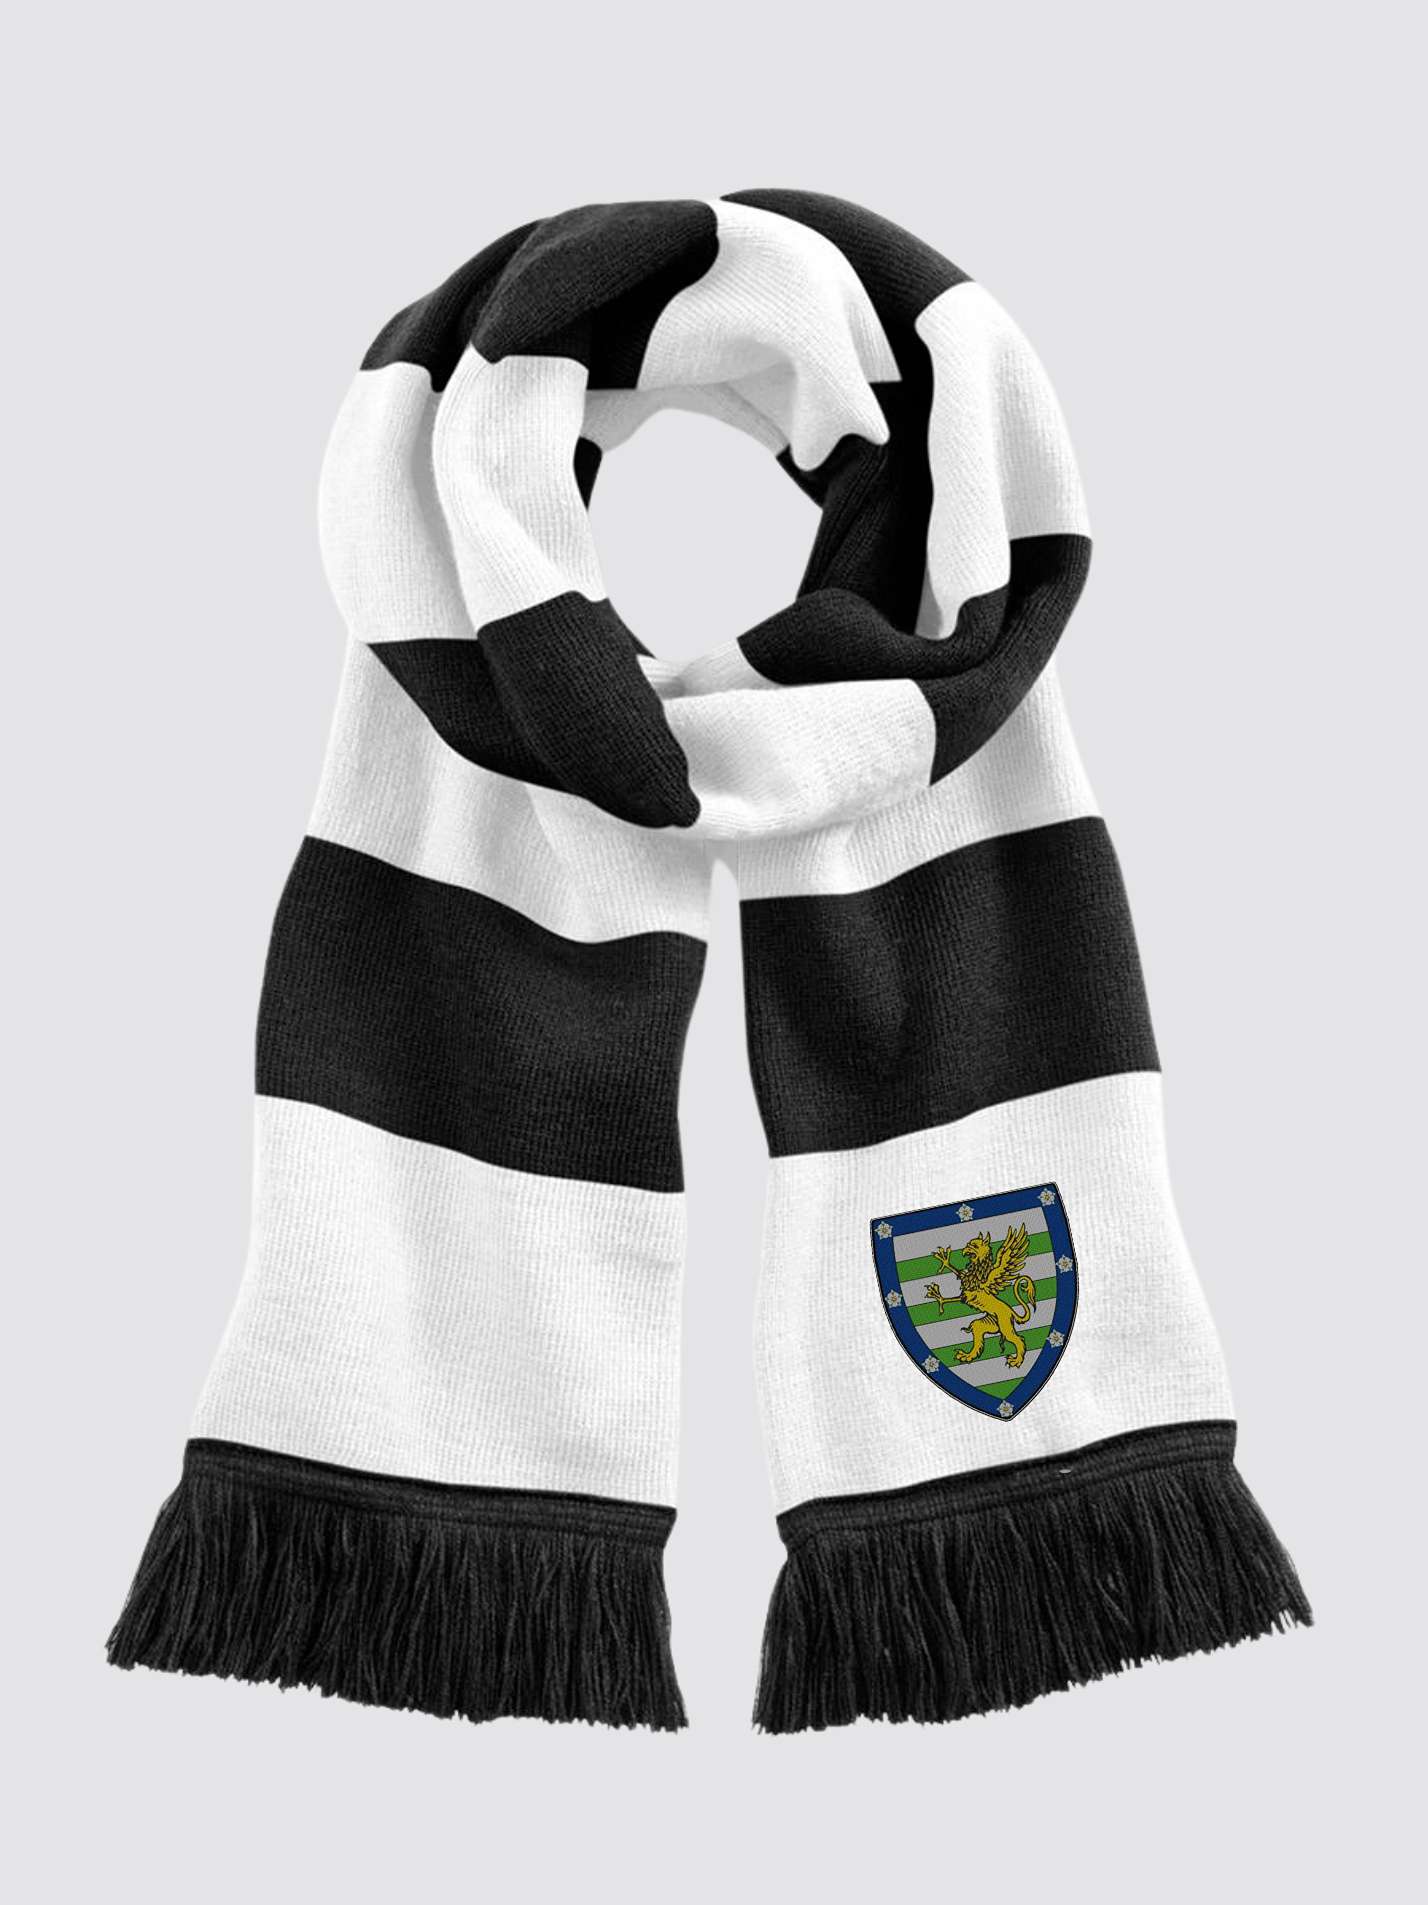 Downing College Cambridge JCR Oxford Striped Scarf